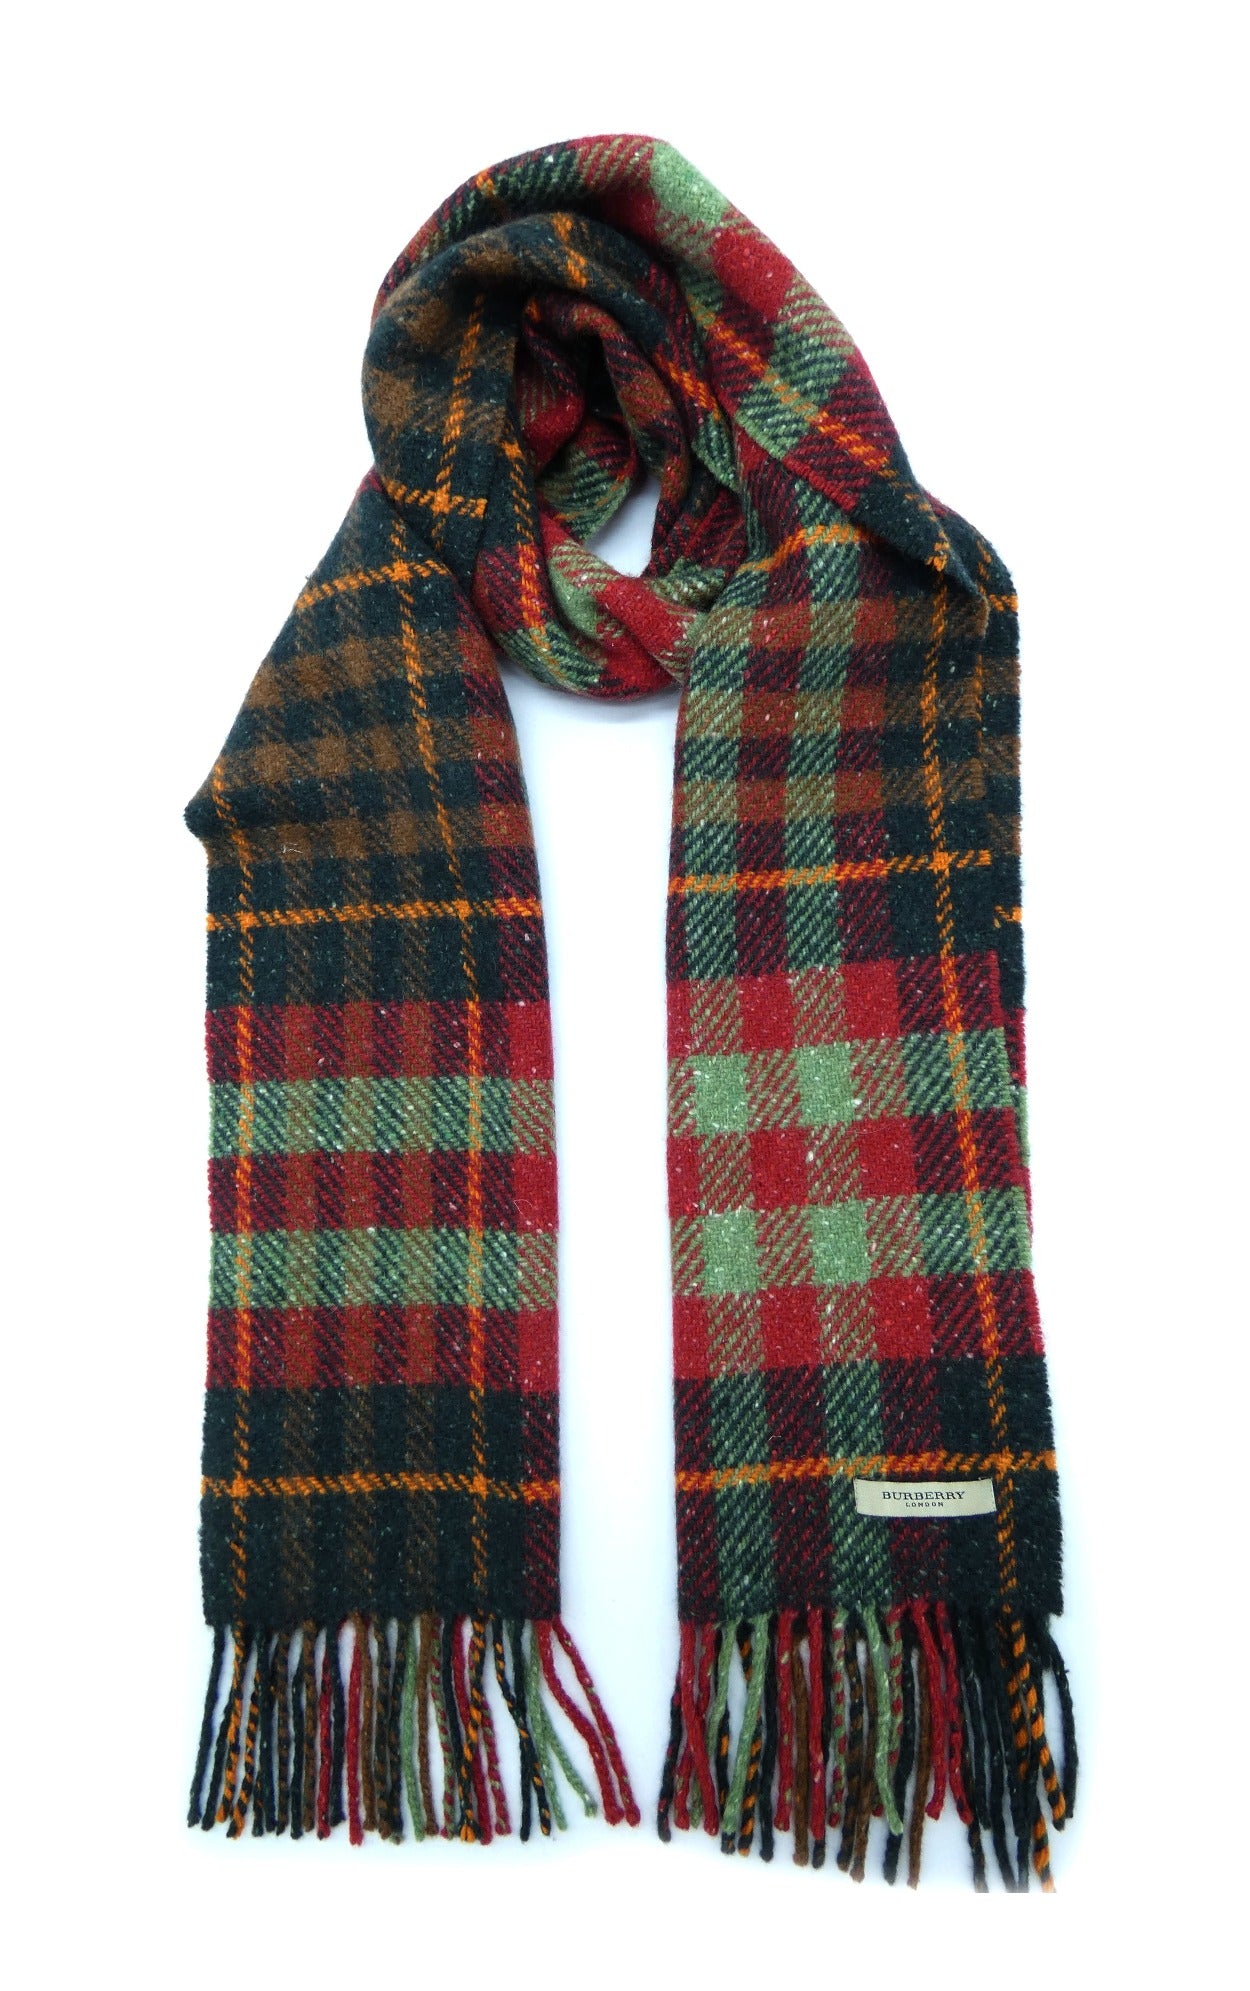 Burberry Merino Wool Angora and Cashmere Plaid Red Scarf Scarf Burberry